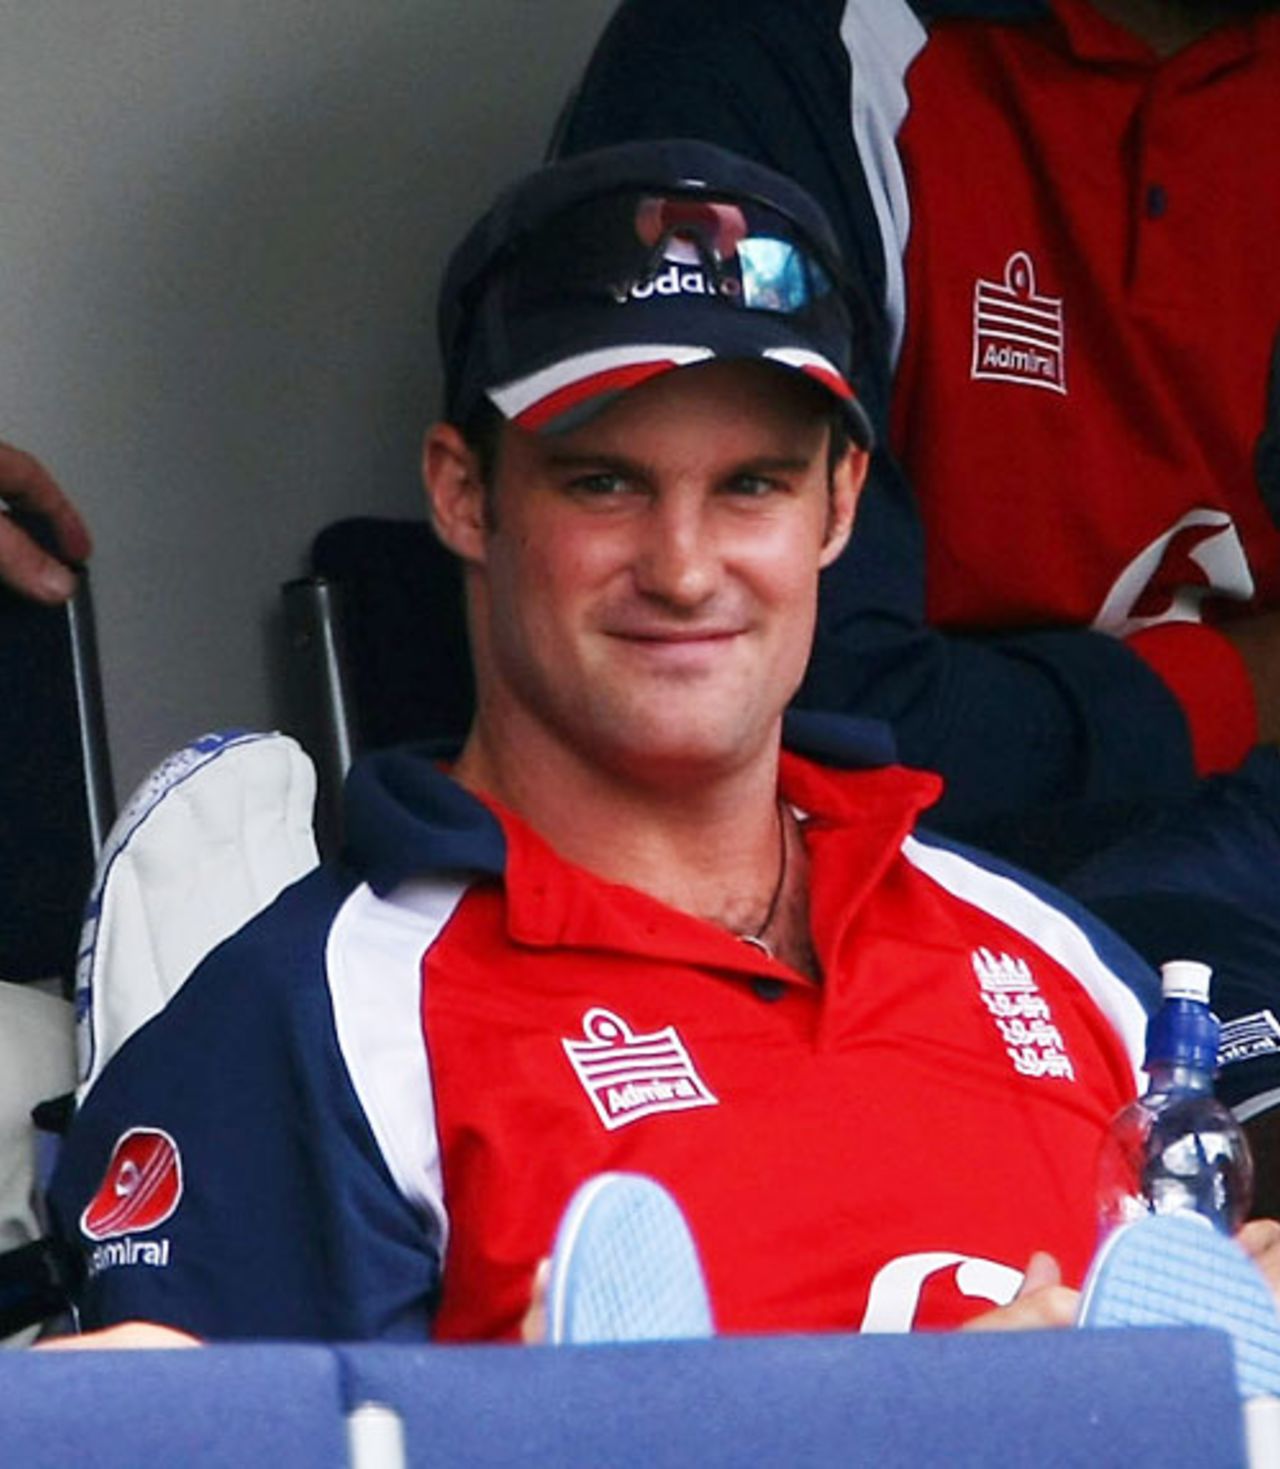 Andrew Strauss looks on after his early dismissal, NZ Invitational XI v England XI, Dunedin, February 25, 2008